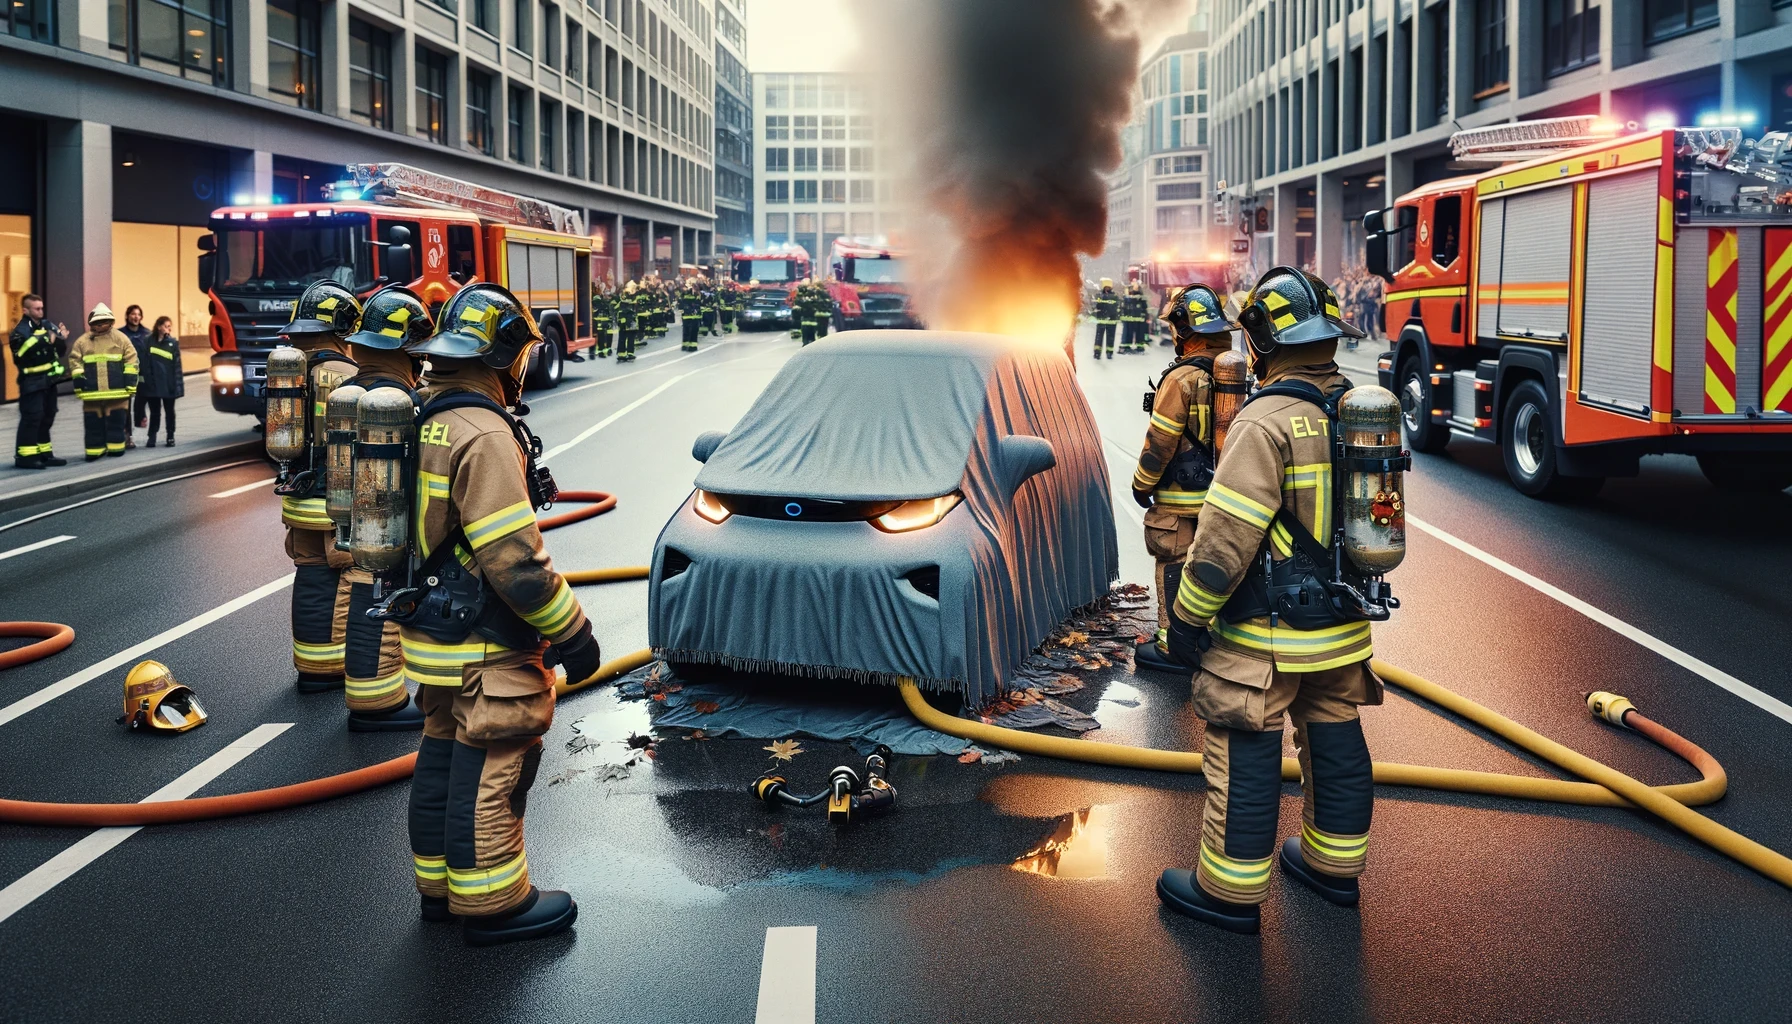 Firefighters standing around an electric vehicle (EV) with the fire blanket completely covering it. The scene shows a team of firefighters in full gea